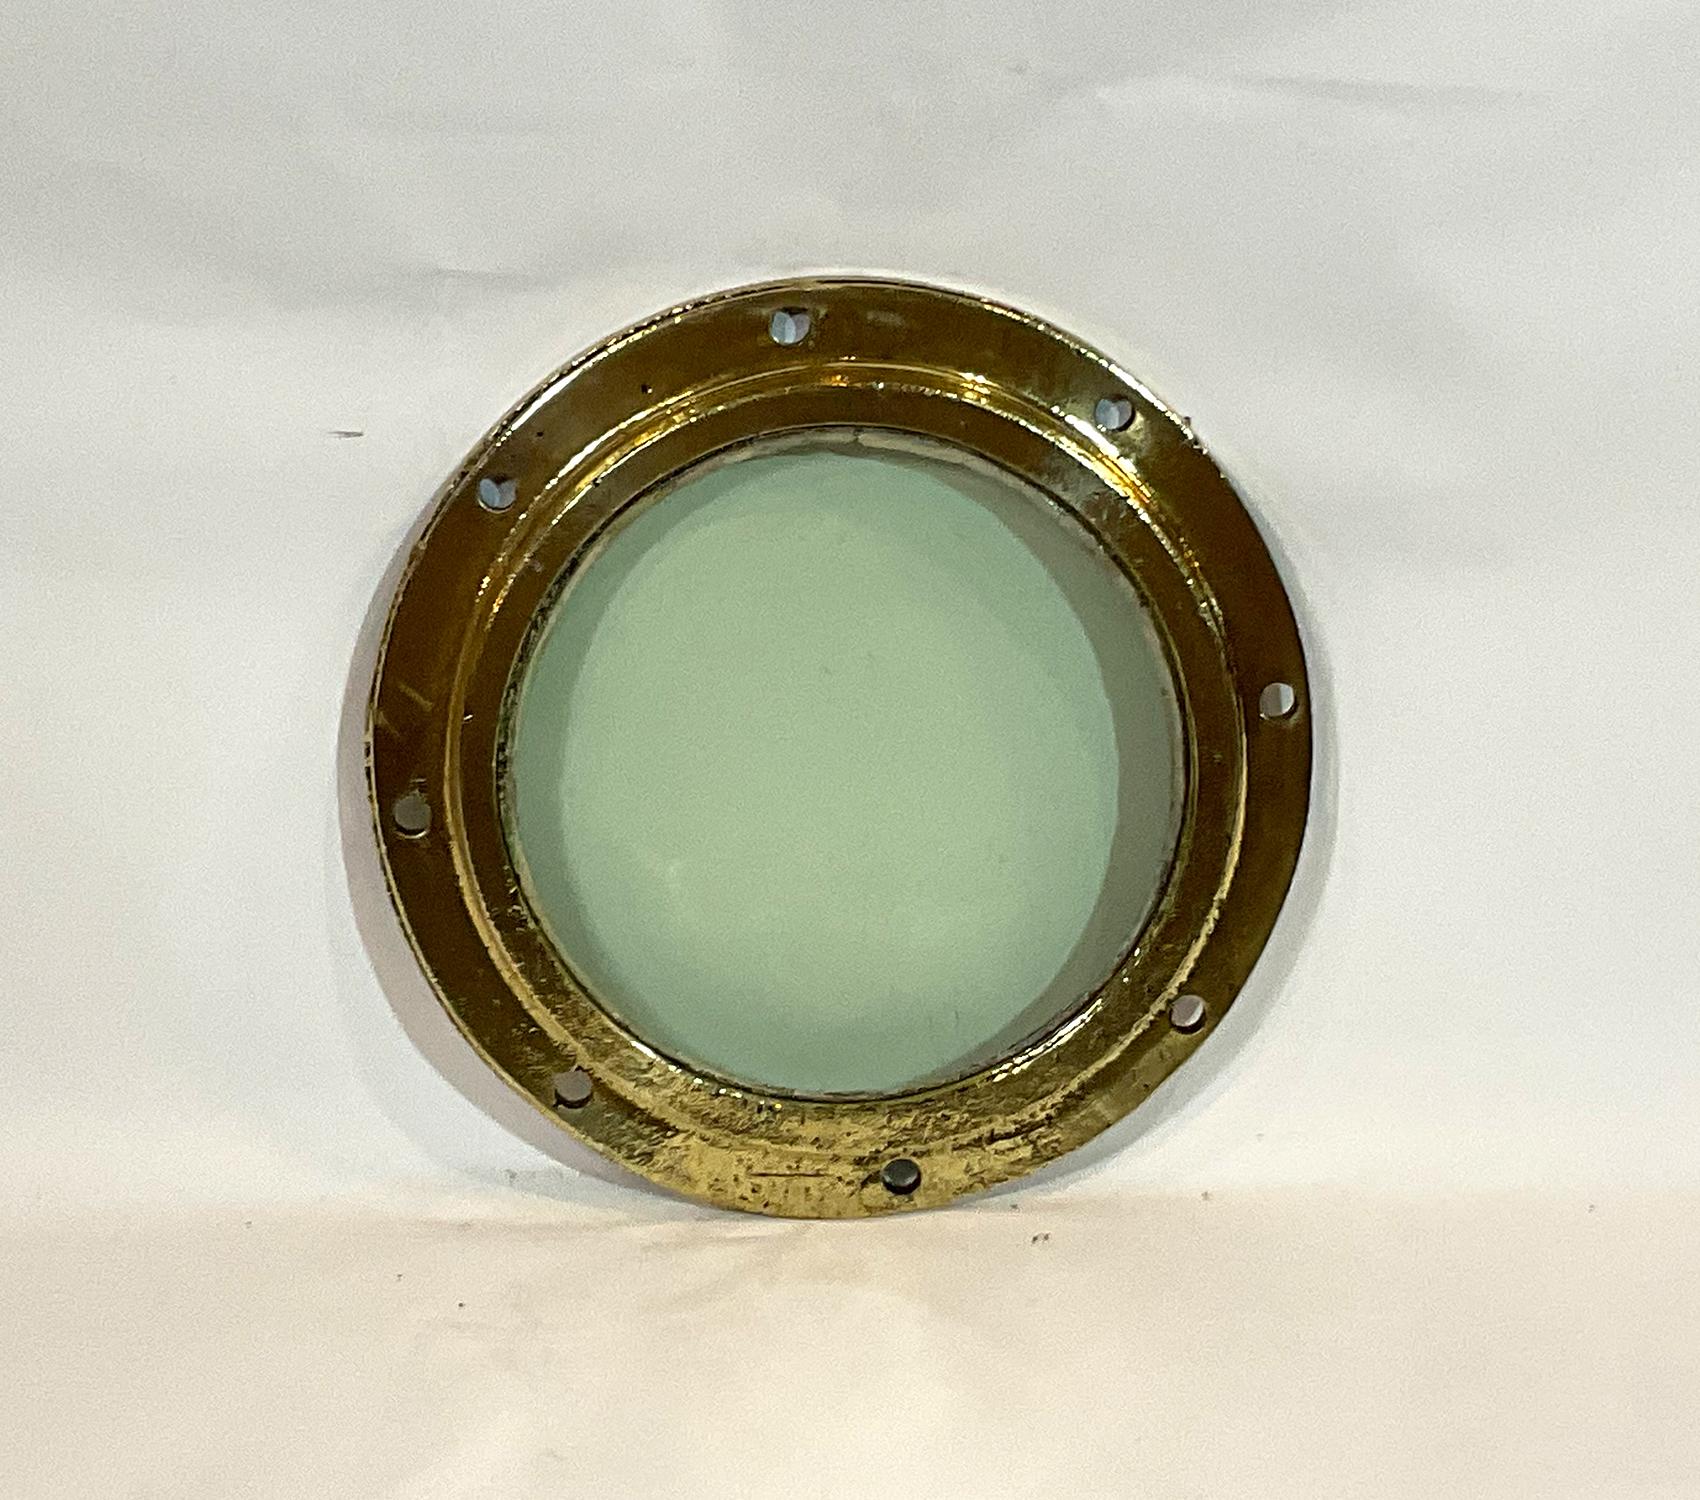 Solid brass ships fixed porthole with tempered glass. The original tempered glass does have imperfections from years at sea. Highly polished boat portlight. This is a worn relic, not as smooth as most of our portholes.

Weight: 16 LBS
Overall